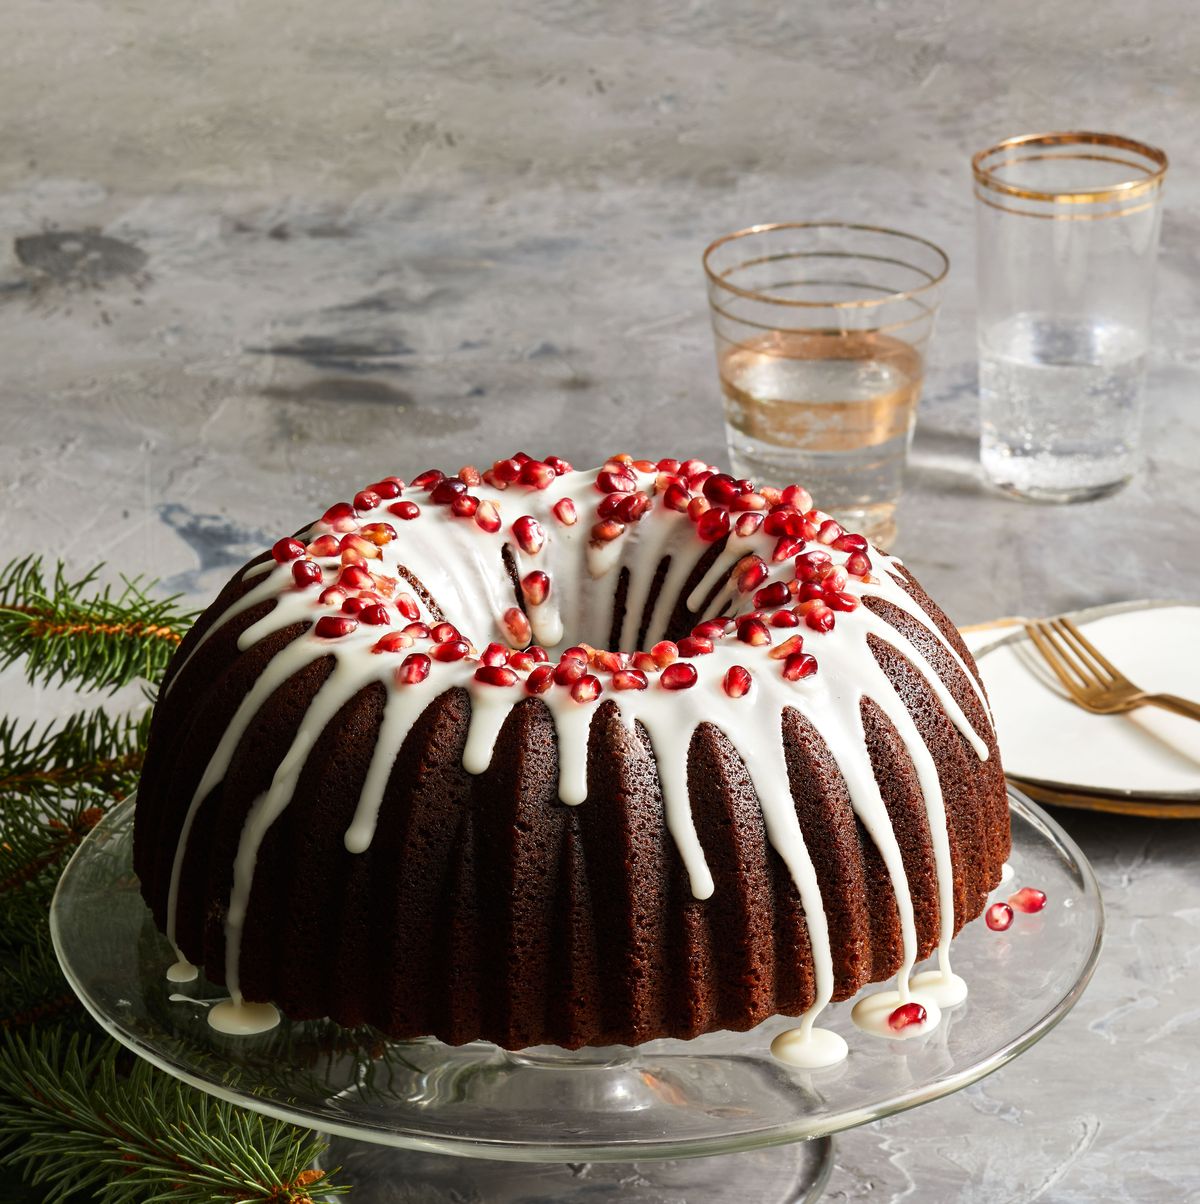 The BEST Gingerbread Bundt Cake - Homemade and Easy to Make!